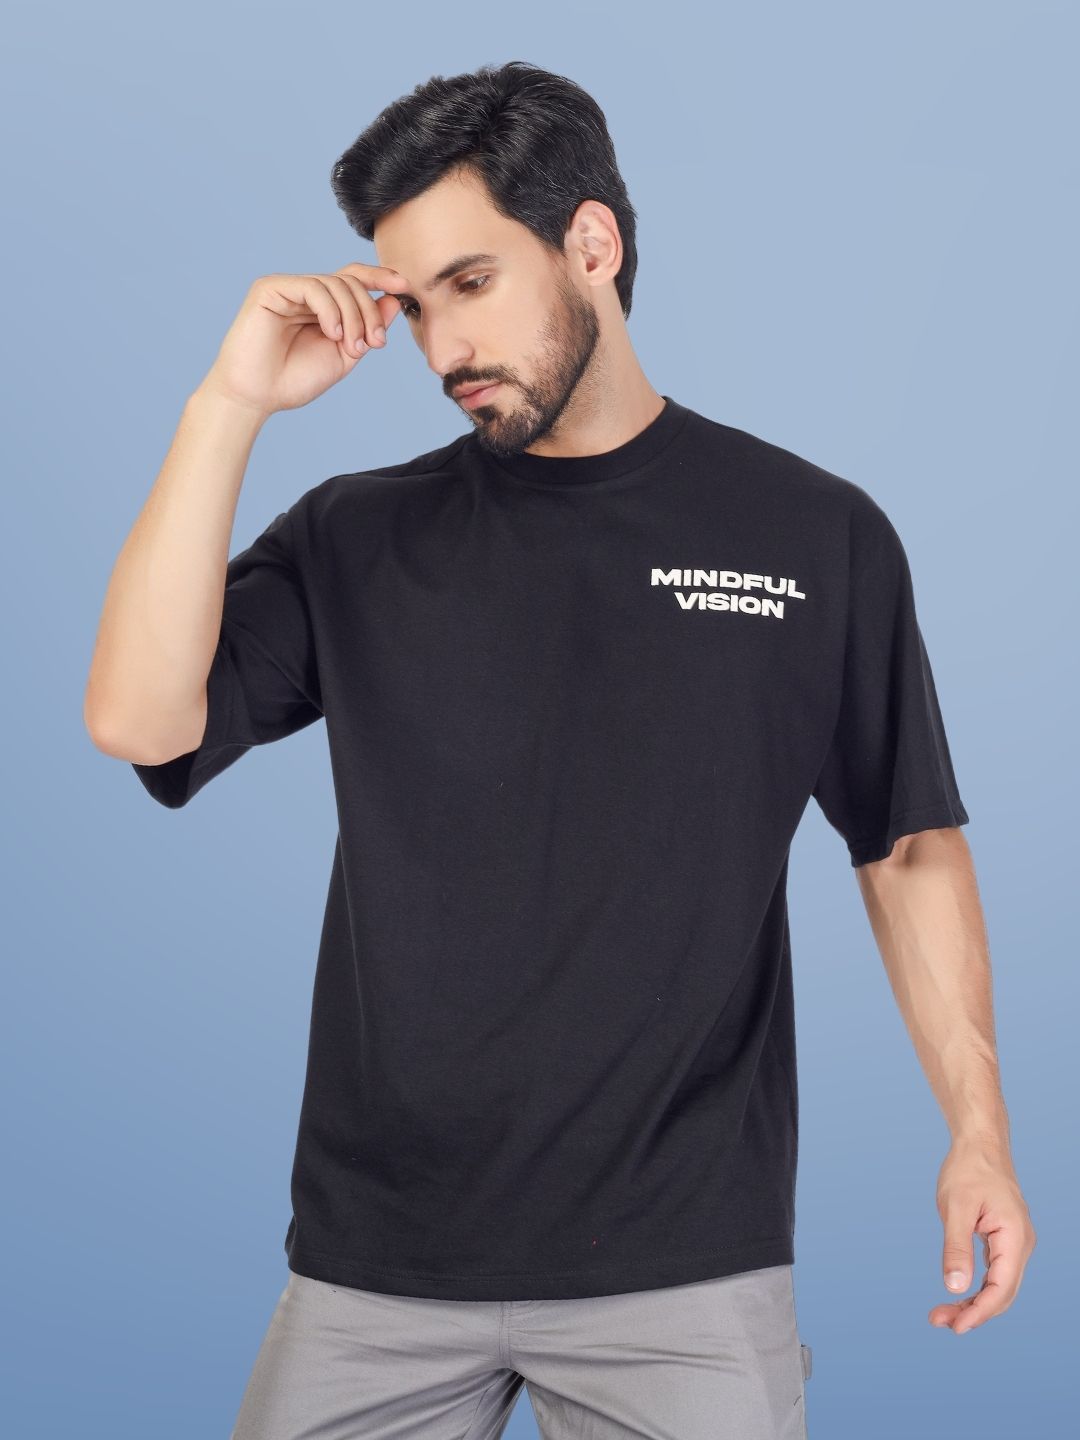 Mindful Vision Over-Sized T-Shirt (Black) - Wearduds